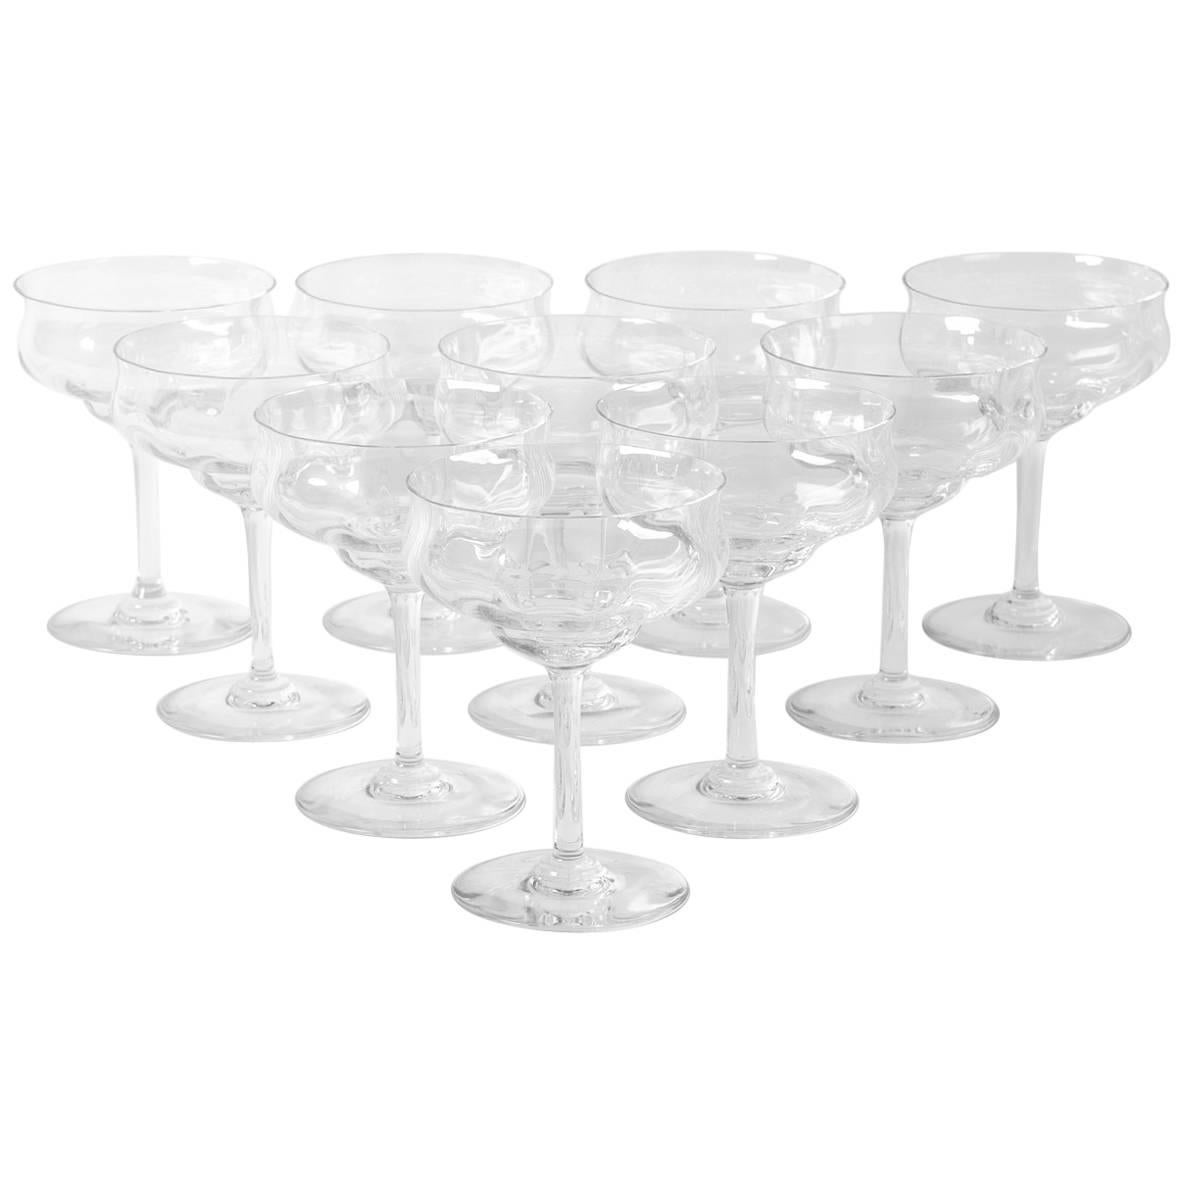 Vintage Baccarat Crystal Champagne / Martini Crystal Coupes